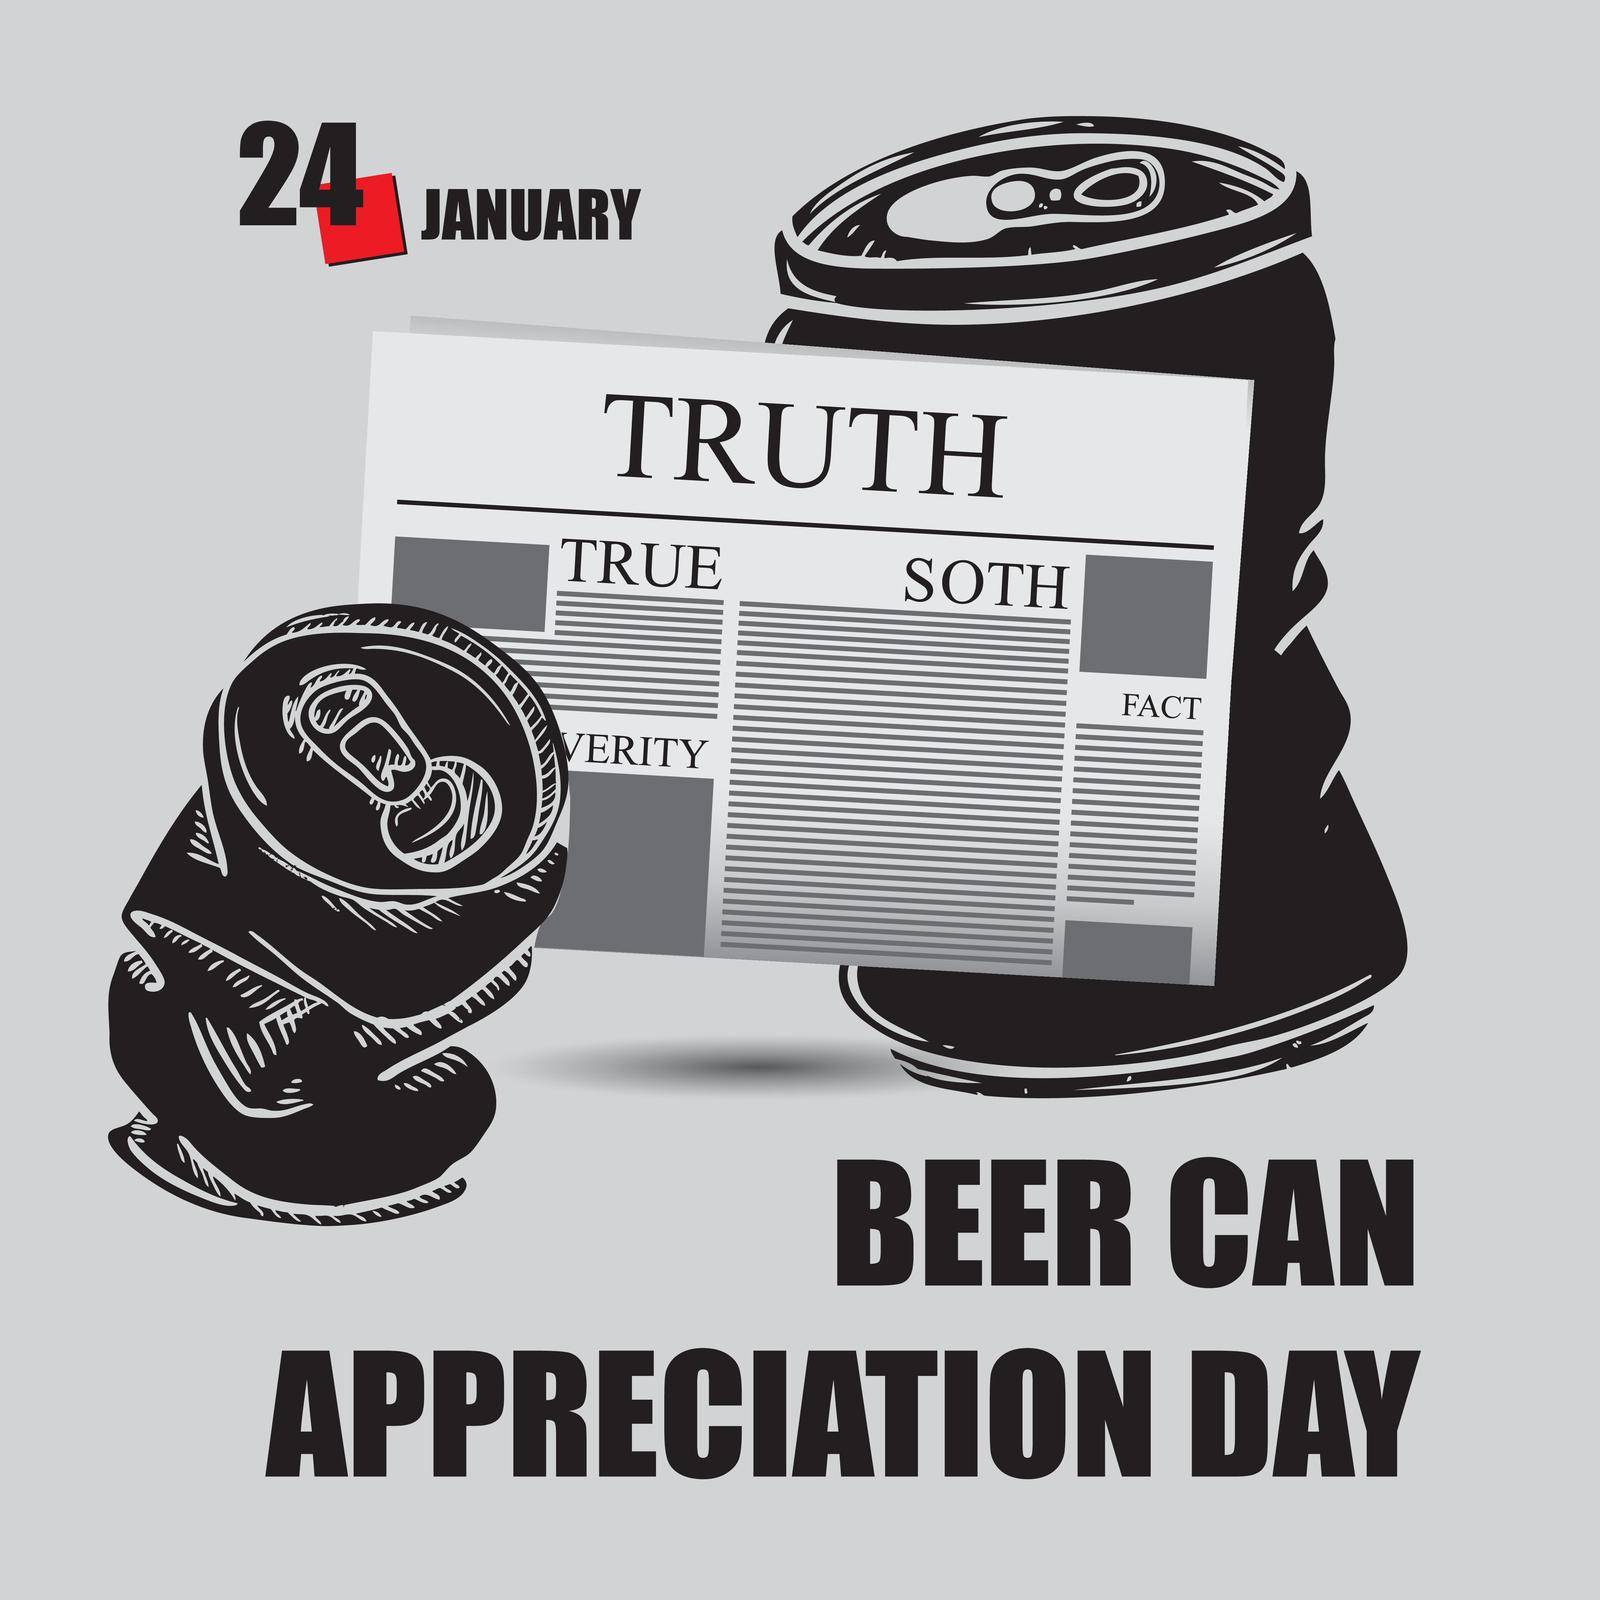 Newspaper page for the holiday - Beer Can Appreciation Day